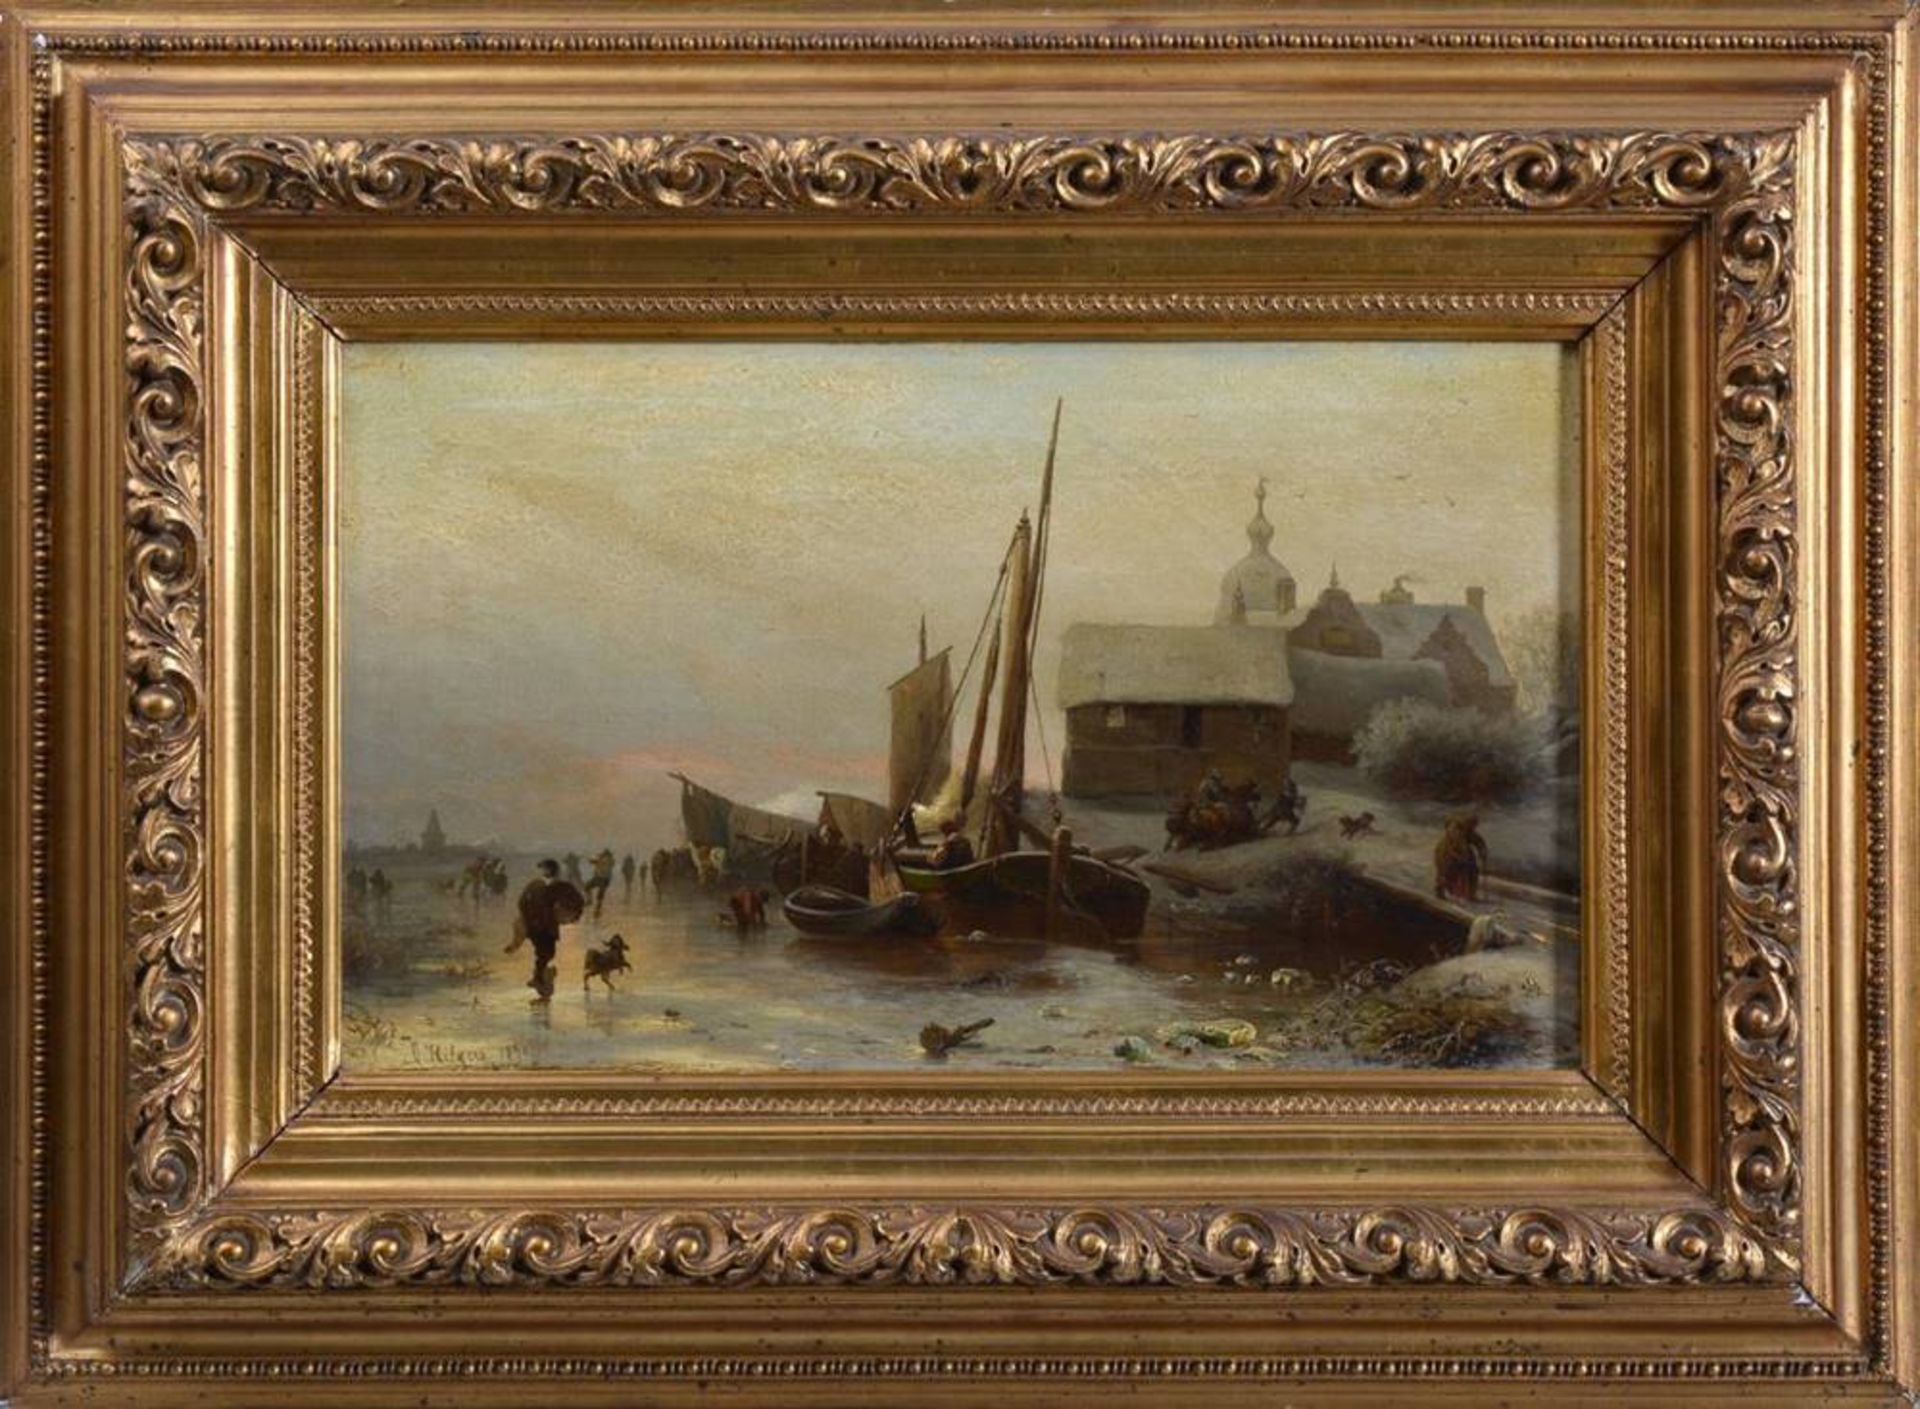 Carl Hilgers (1818, Düsseldorf - 1890), fishing village with boats in winter, dat. (18)70, signed